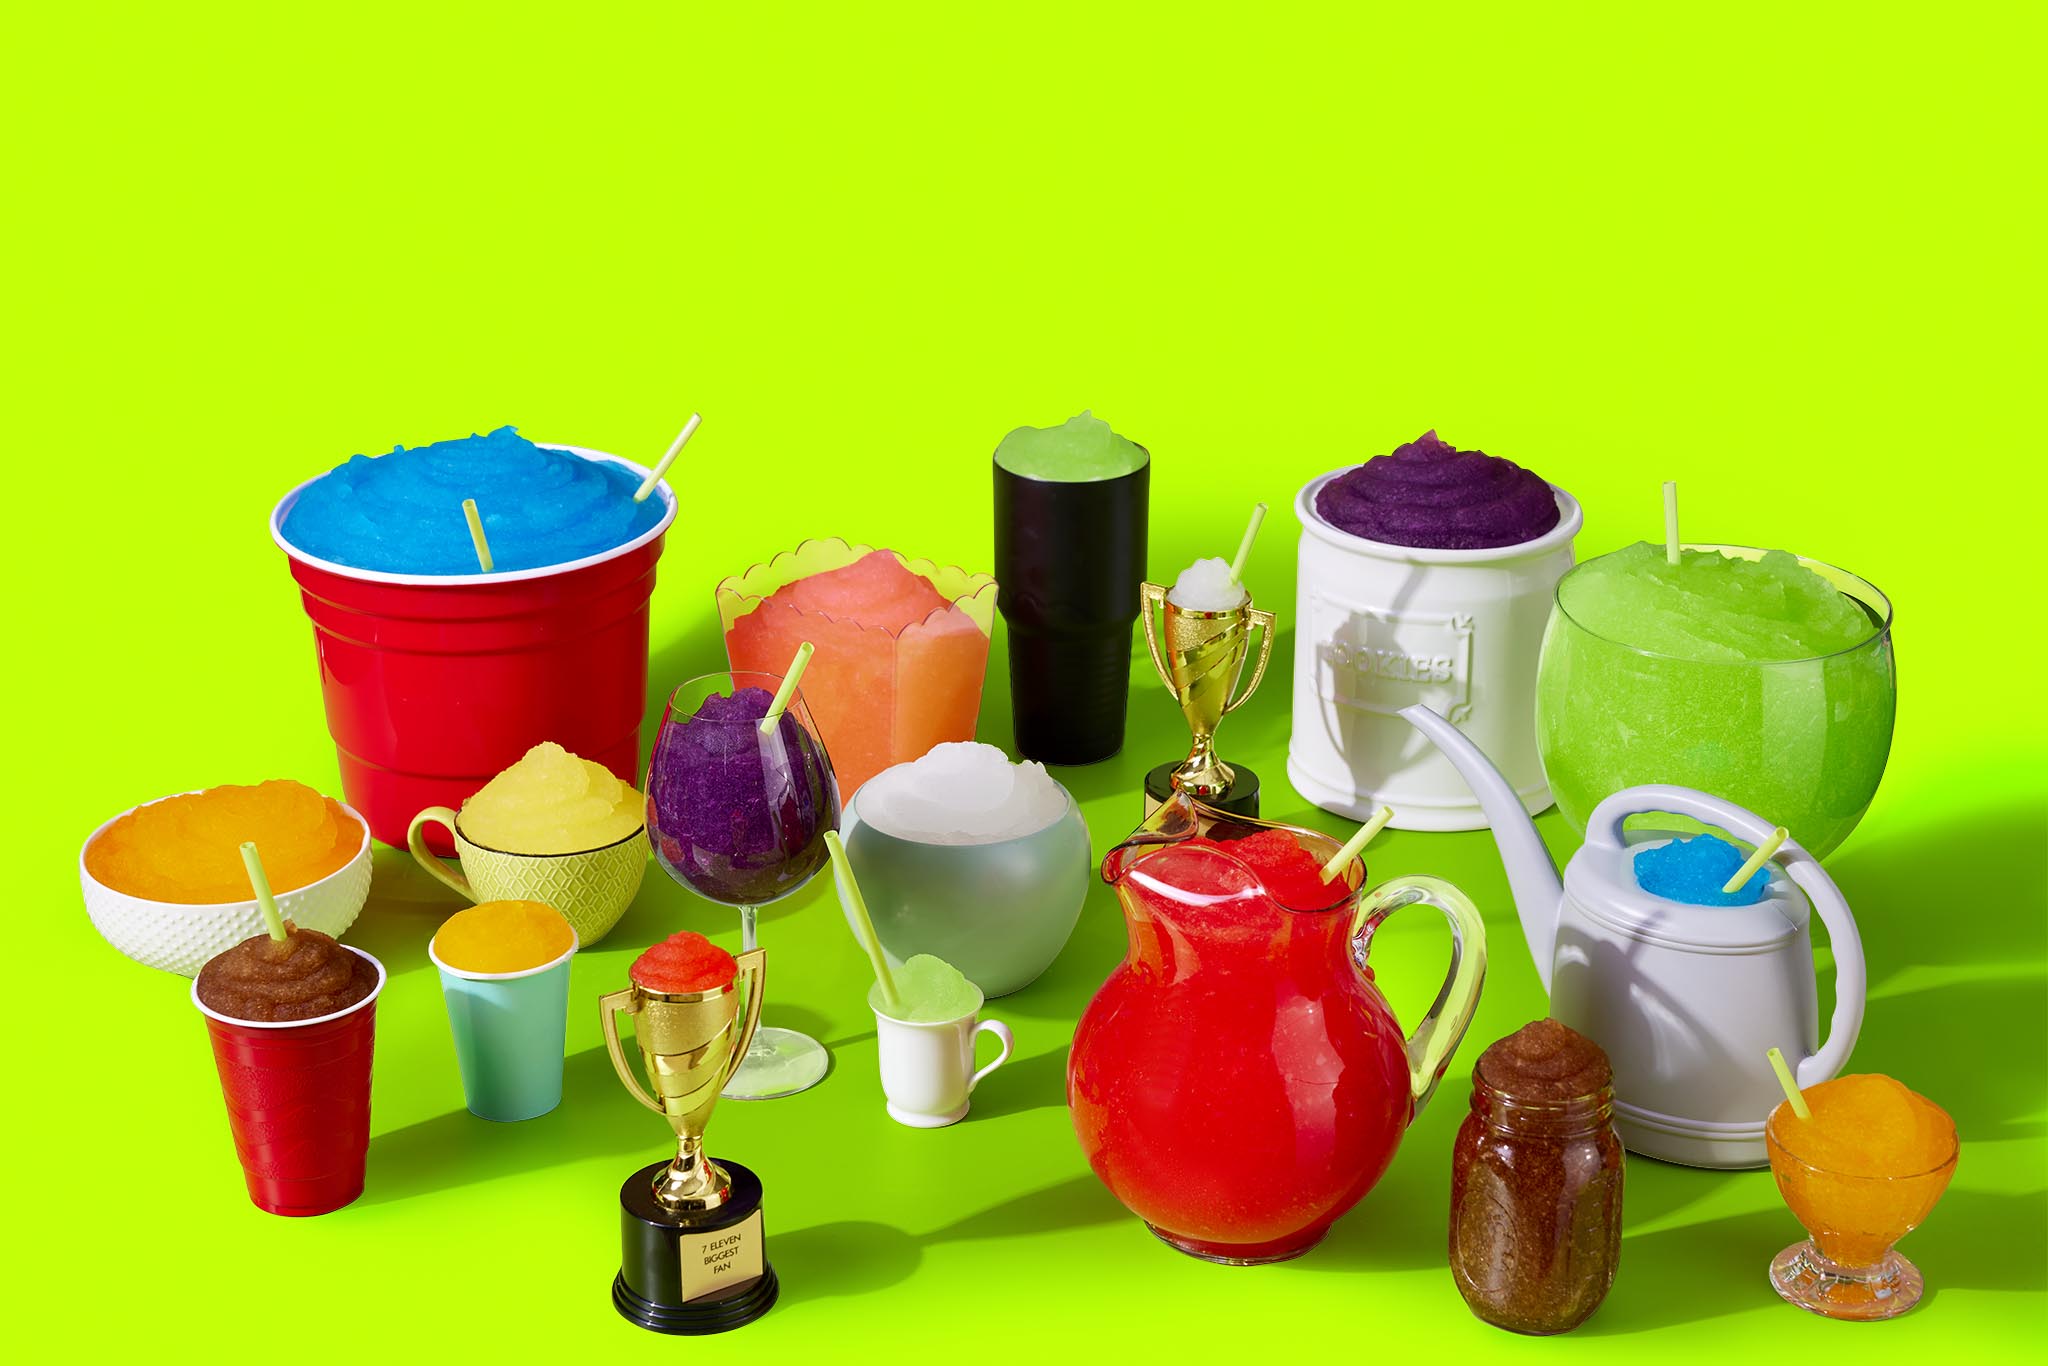 Bring Your Own Cup Day Returns to 7‑Eleven this Spring